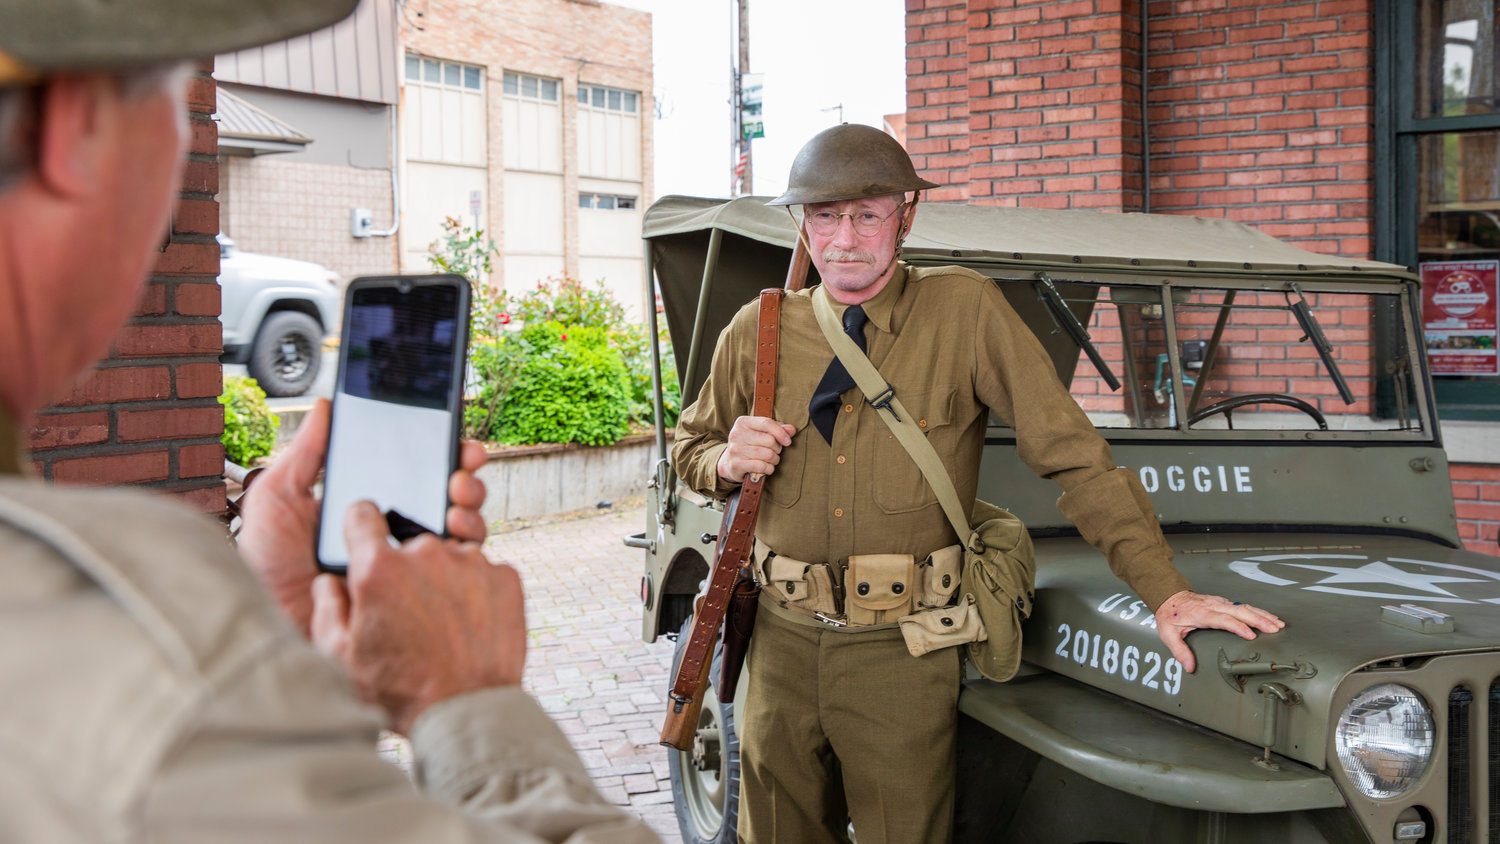 Scott Harriage takes a picture of Lawrence Sandlin wearing an early WWII outfit at the Lewis County Historical Museum in Chehalis.